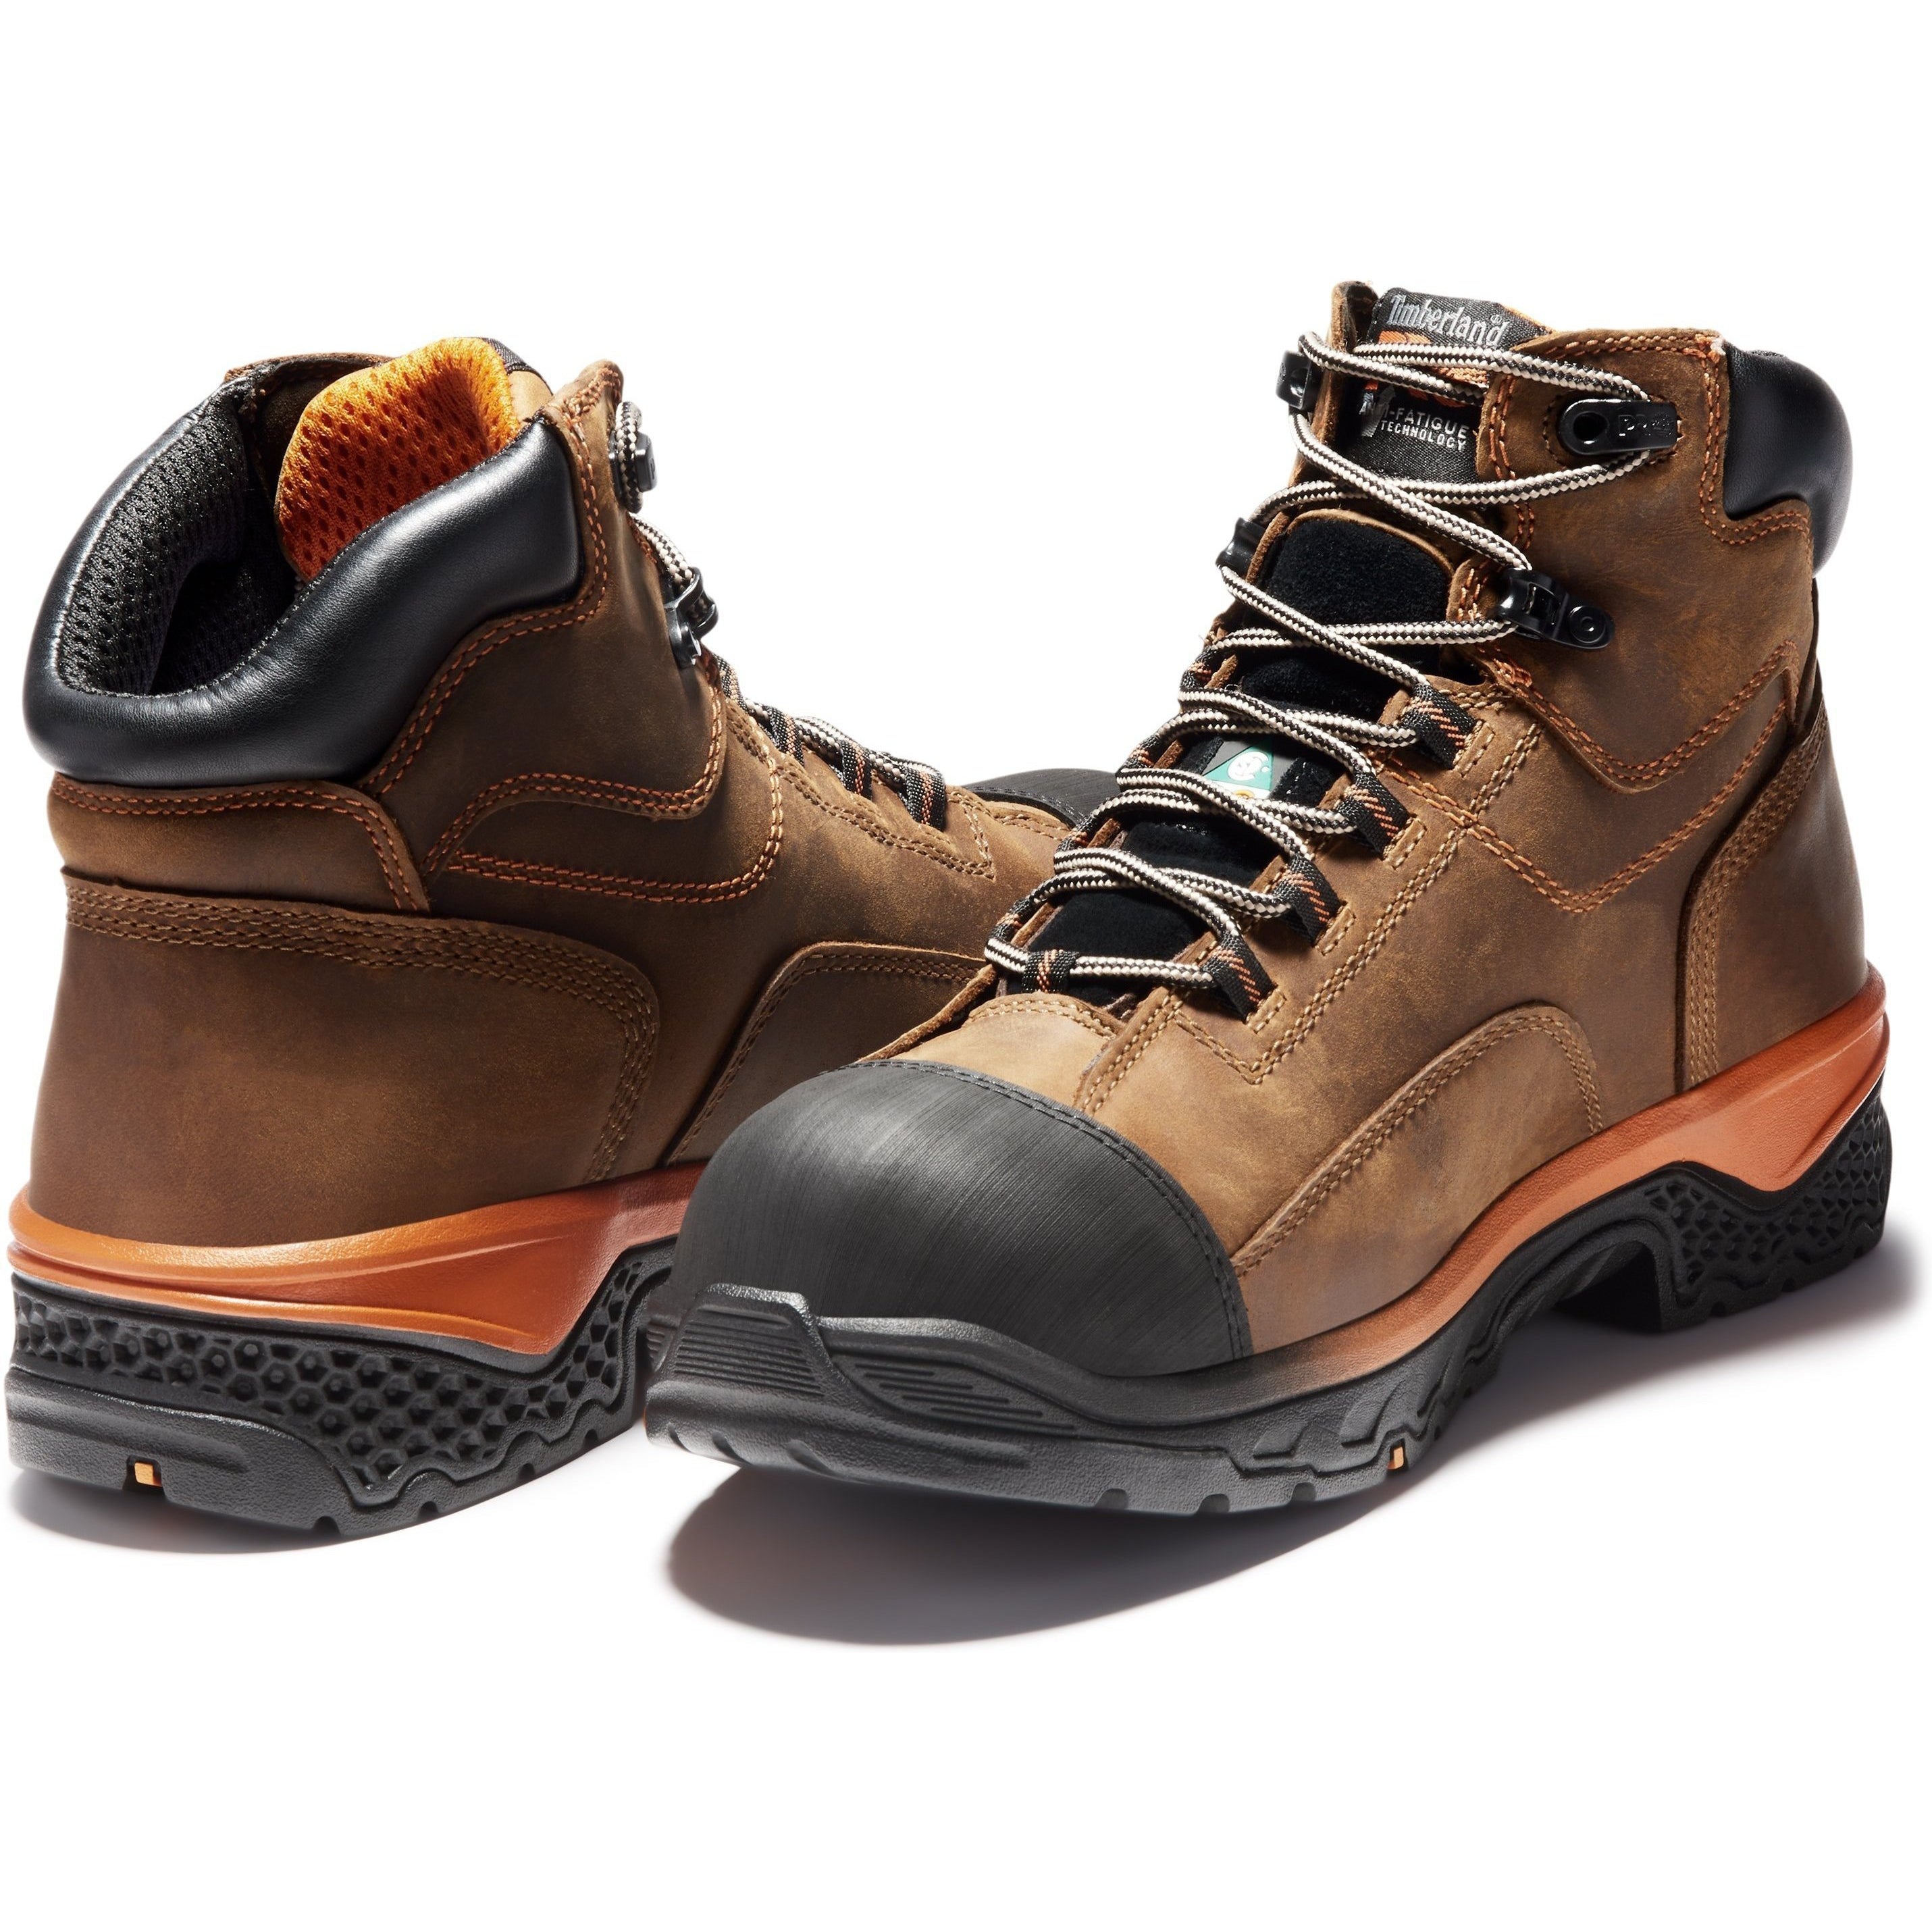 Timberland PRO Men's Bosshog 6" Comp Toe WP Work Boot - TB0A1XK1214  - Overlook Boots